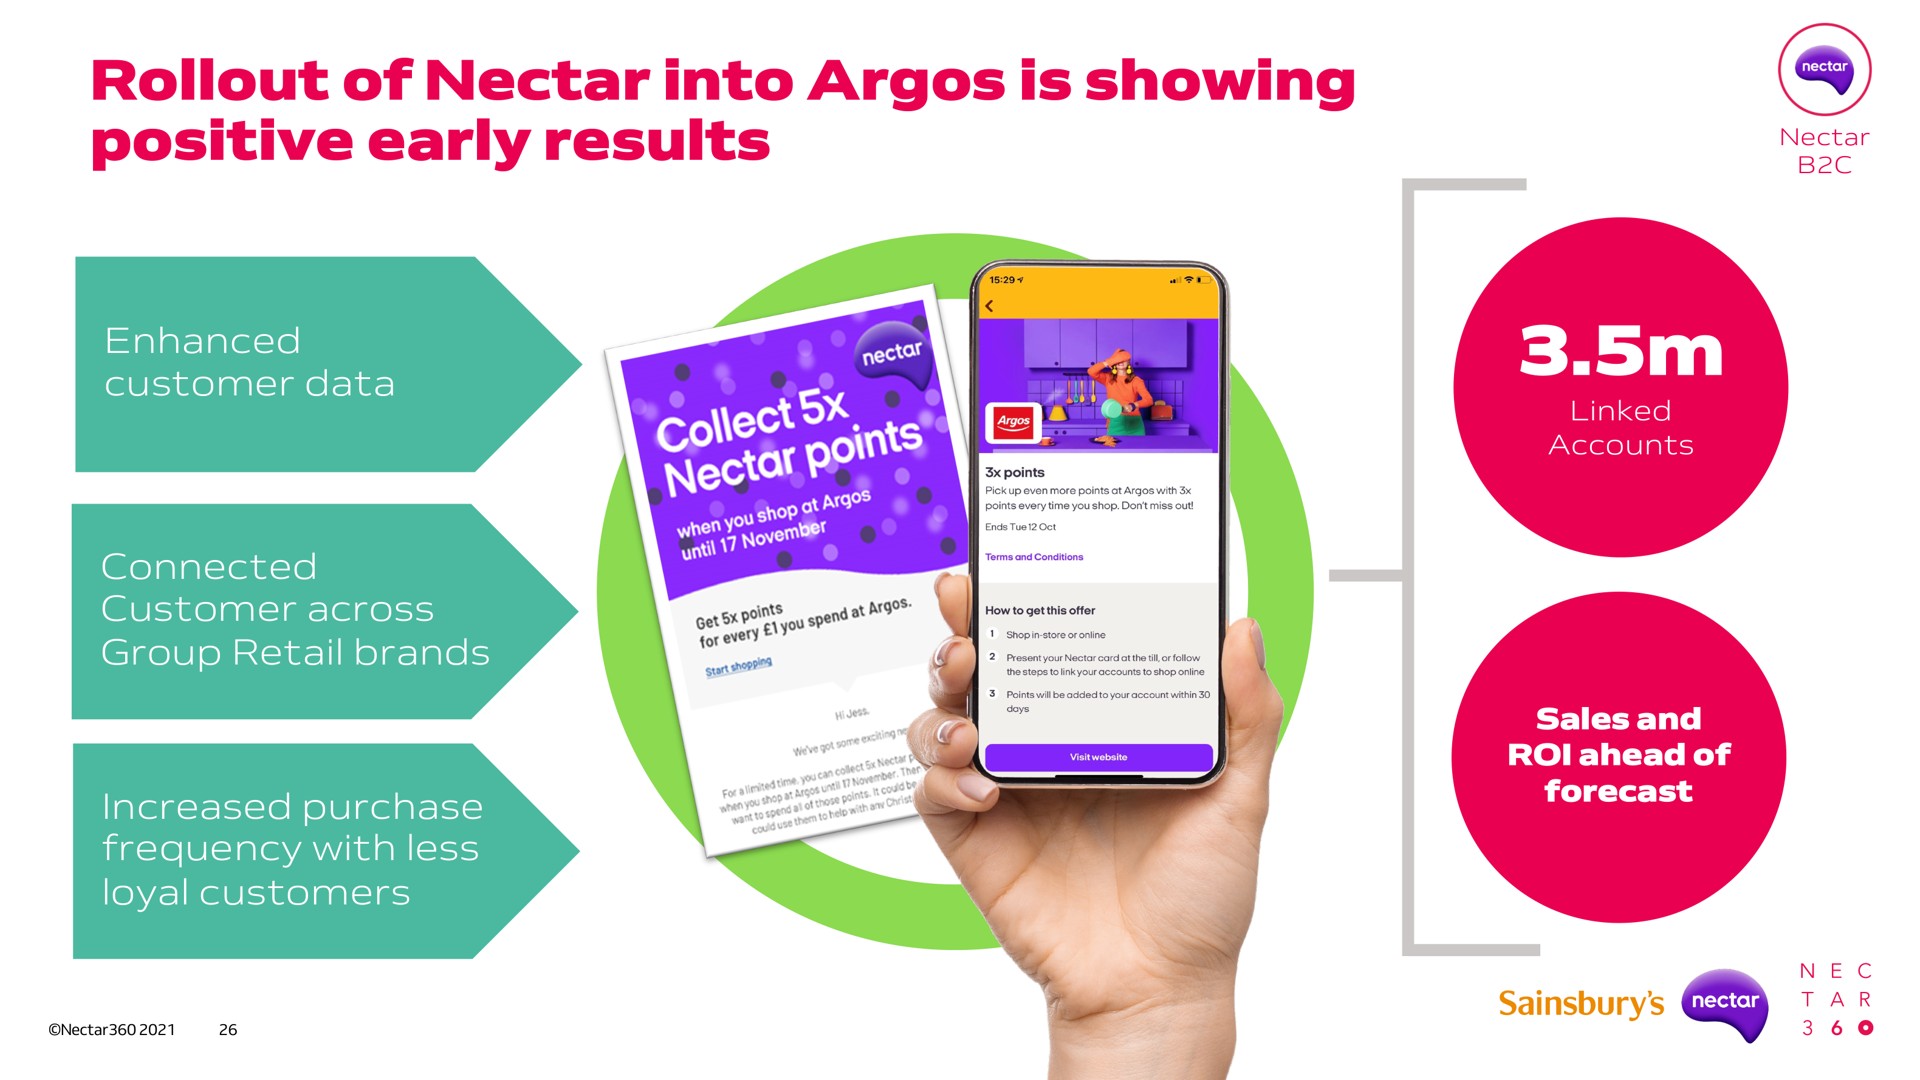 of nectar into argos is showing positive early results | Sainsbury's